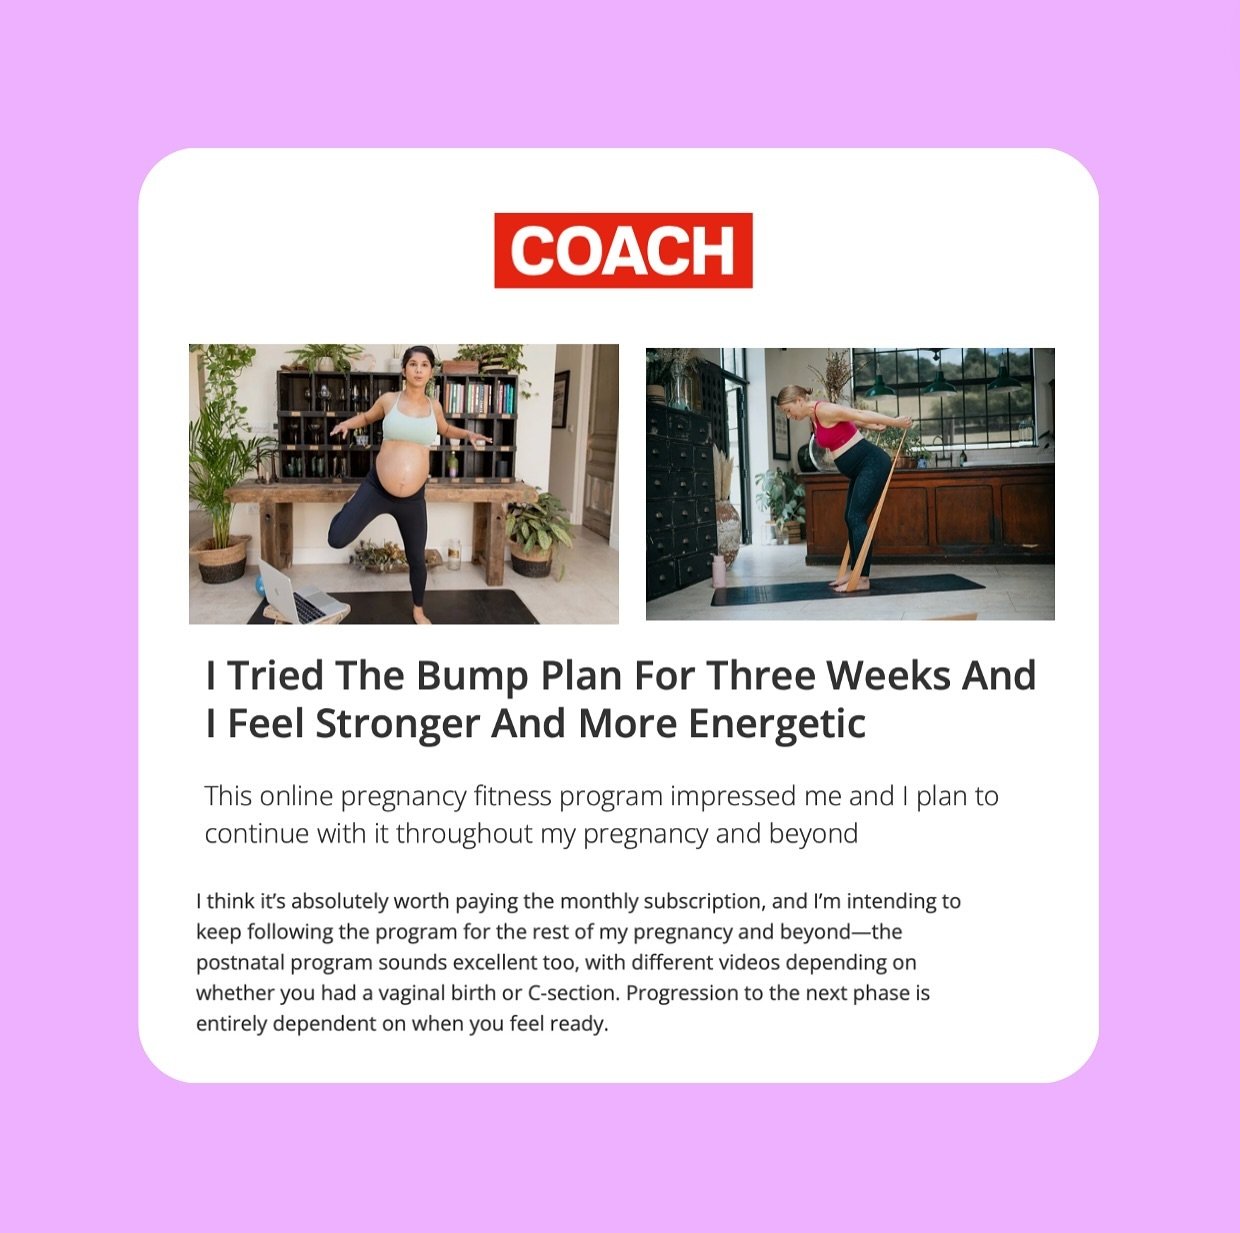 Such an amazing review of @thebumpplan by Camilla at @getcoach 😍⭐️🤰🏼 @thepilatespt